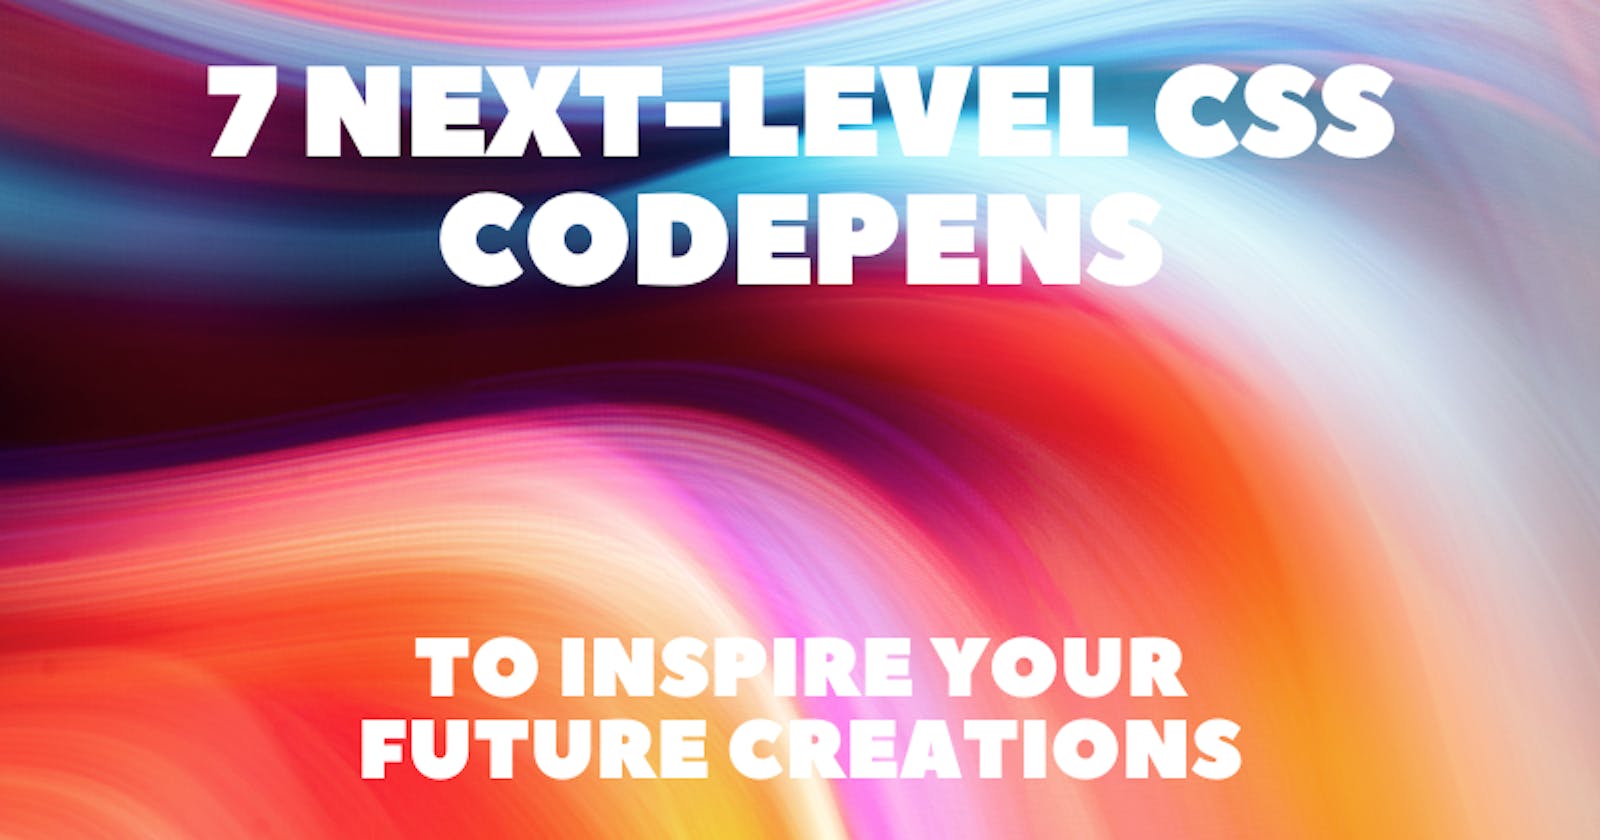 7 Next-Level CSS Codepens to Inspire Your Future Creations 😍✨